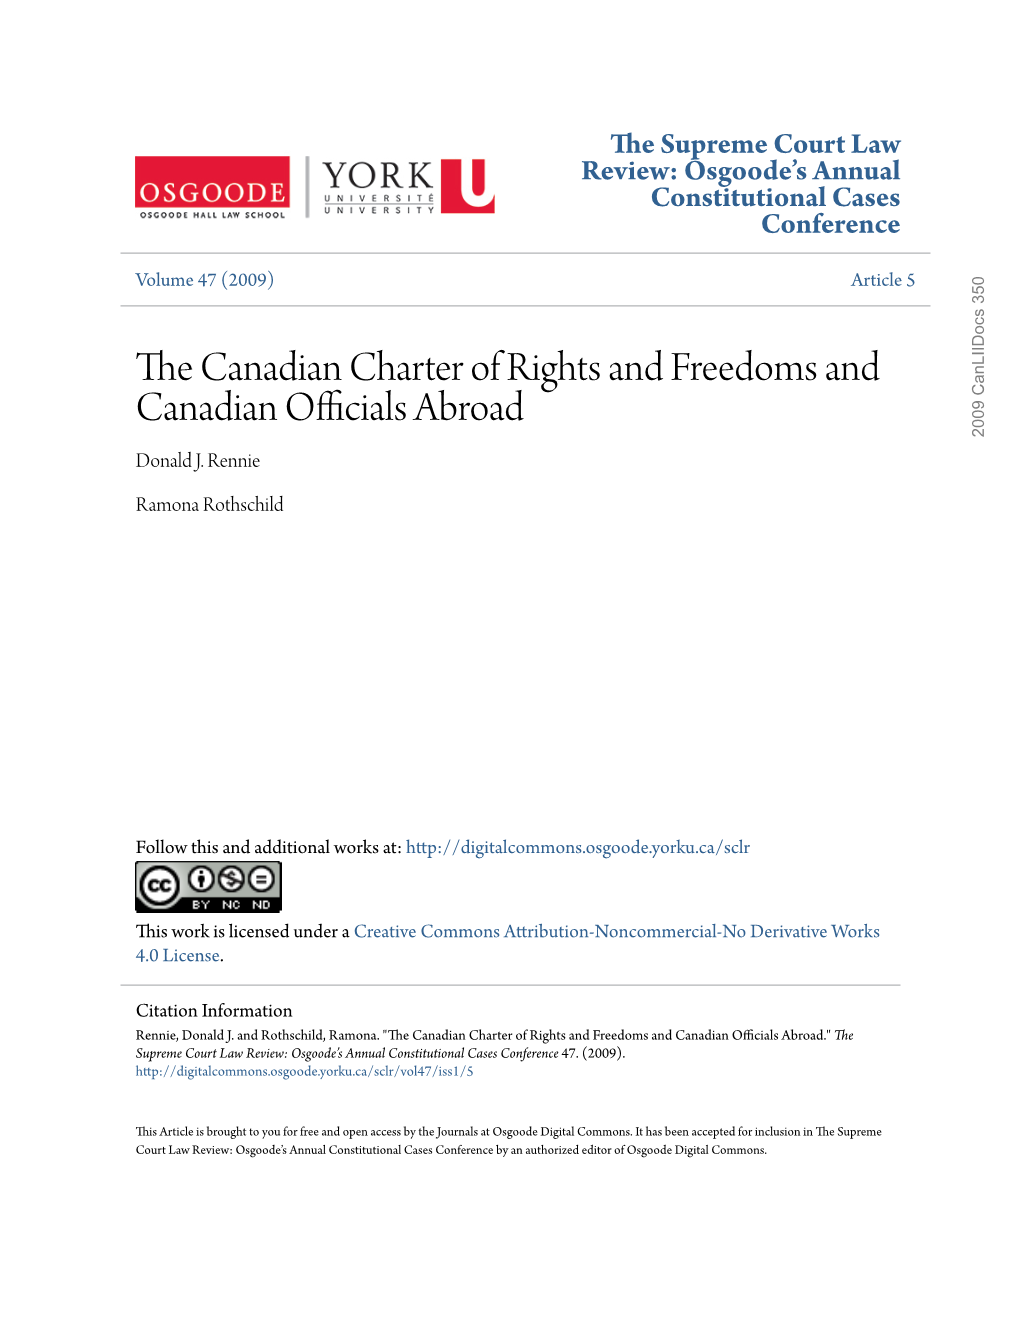 The Canadian Charter of Rights and Freedoms and Canadian Officials Abroad